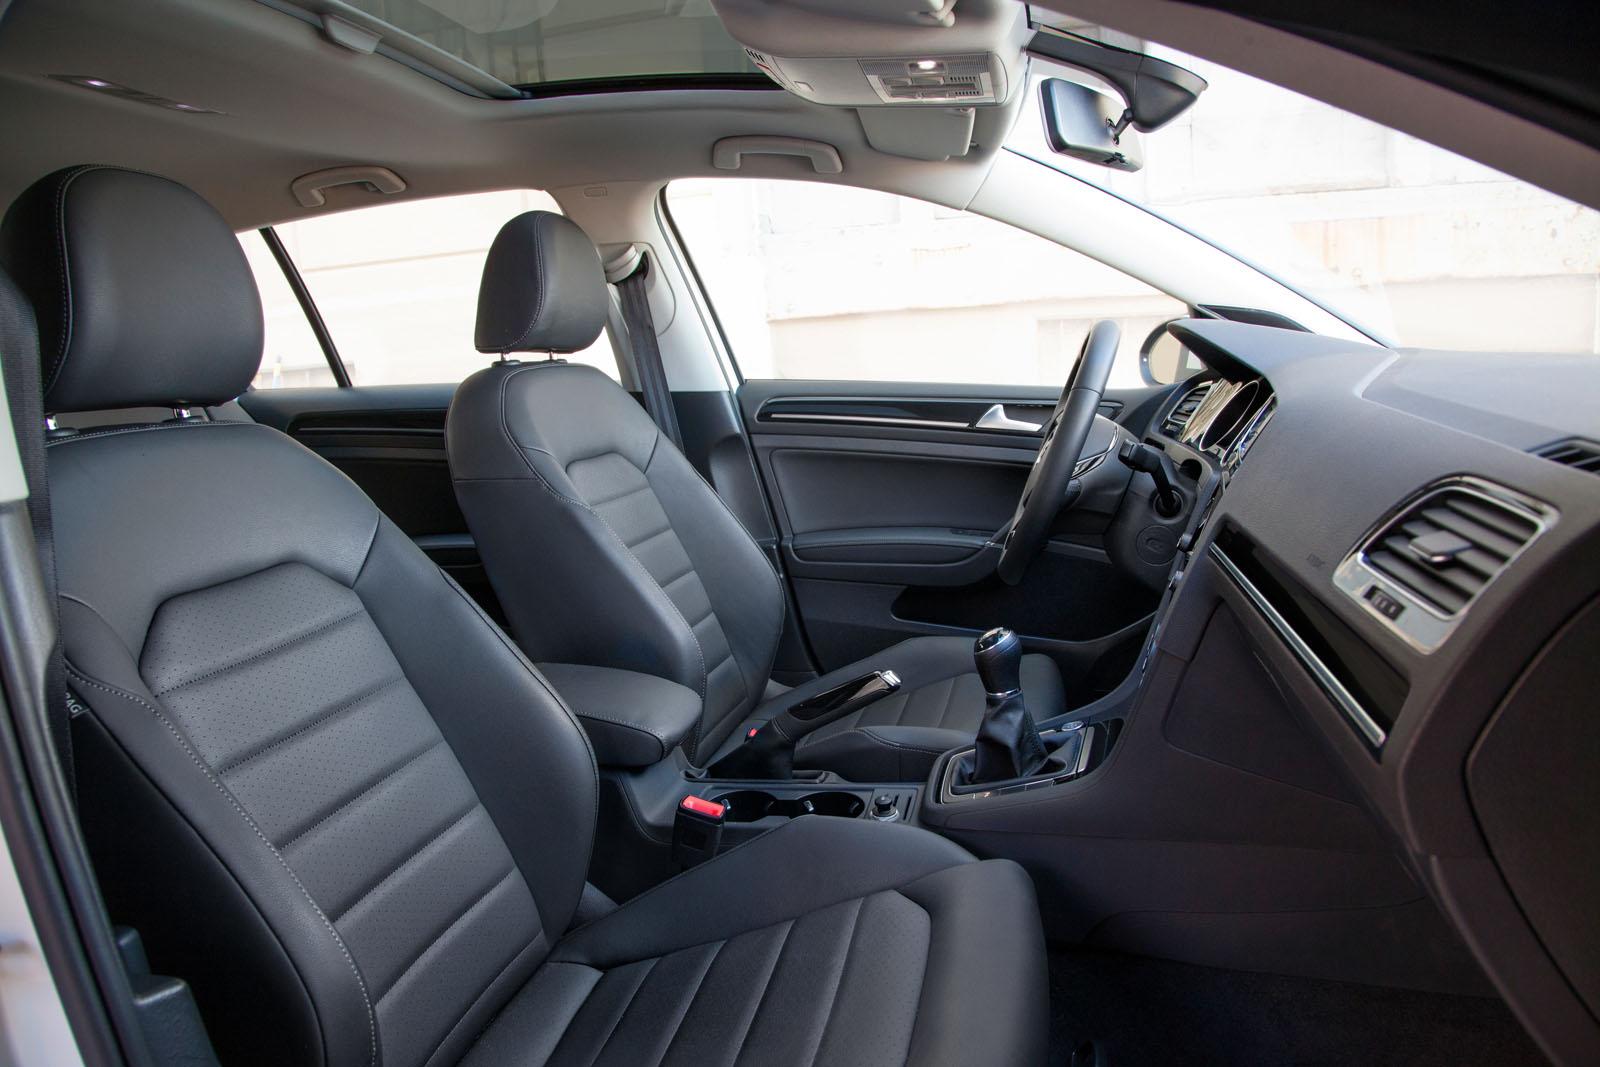 Leather Seats from $18,995